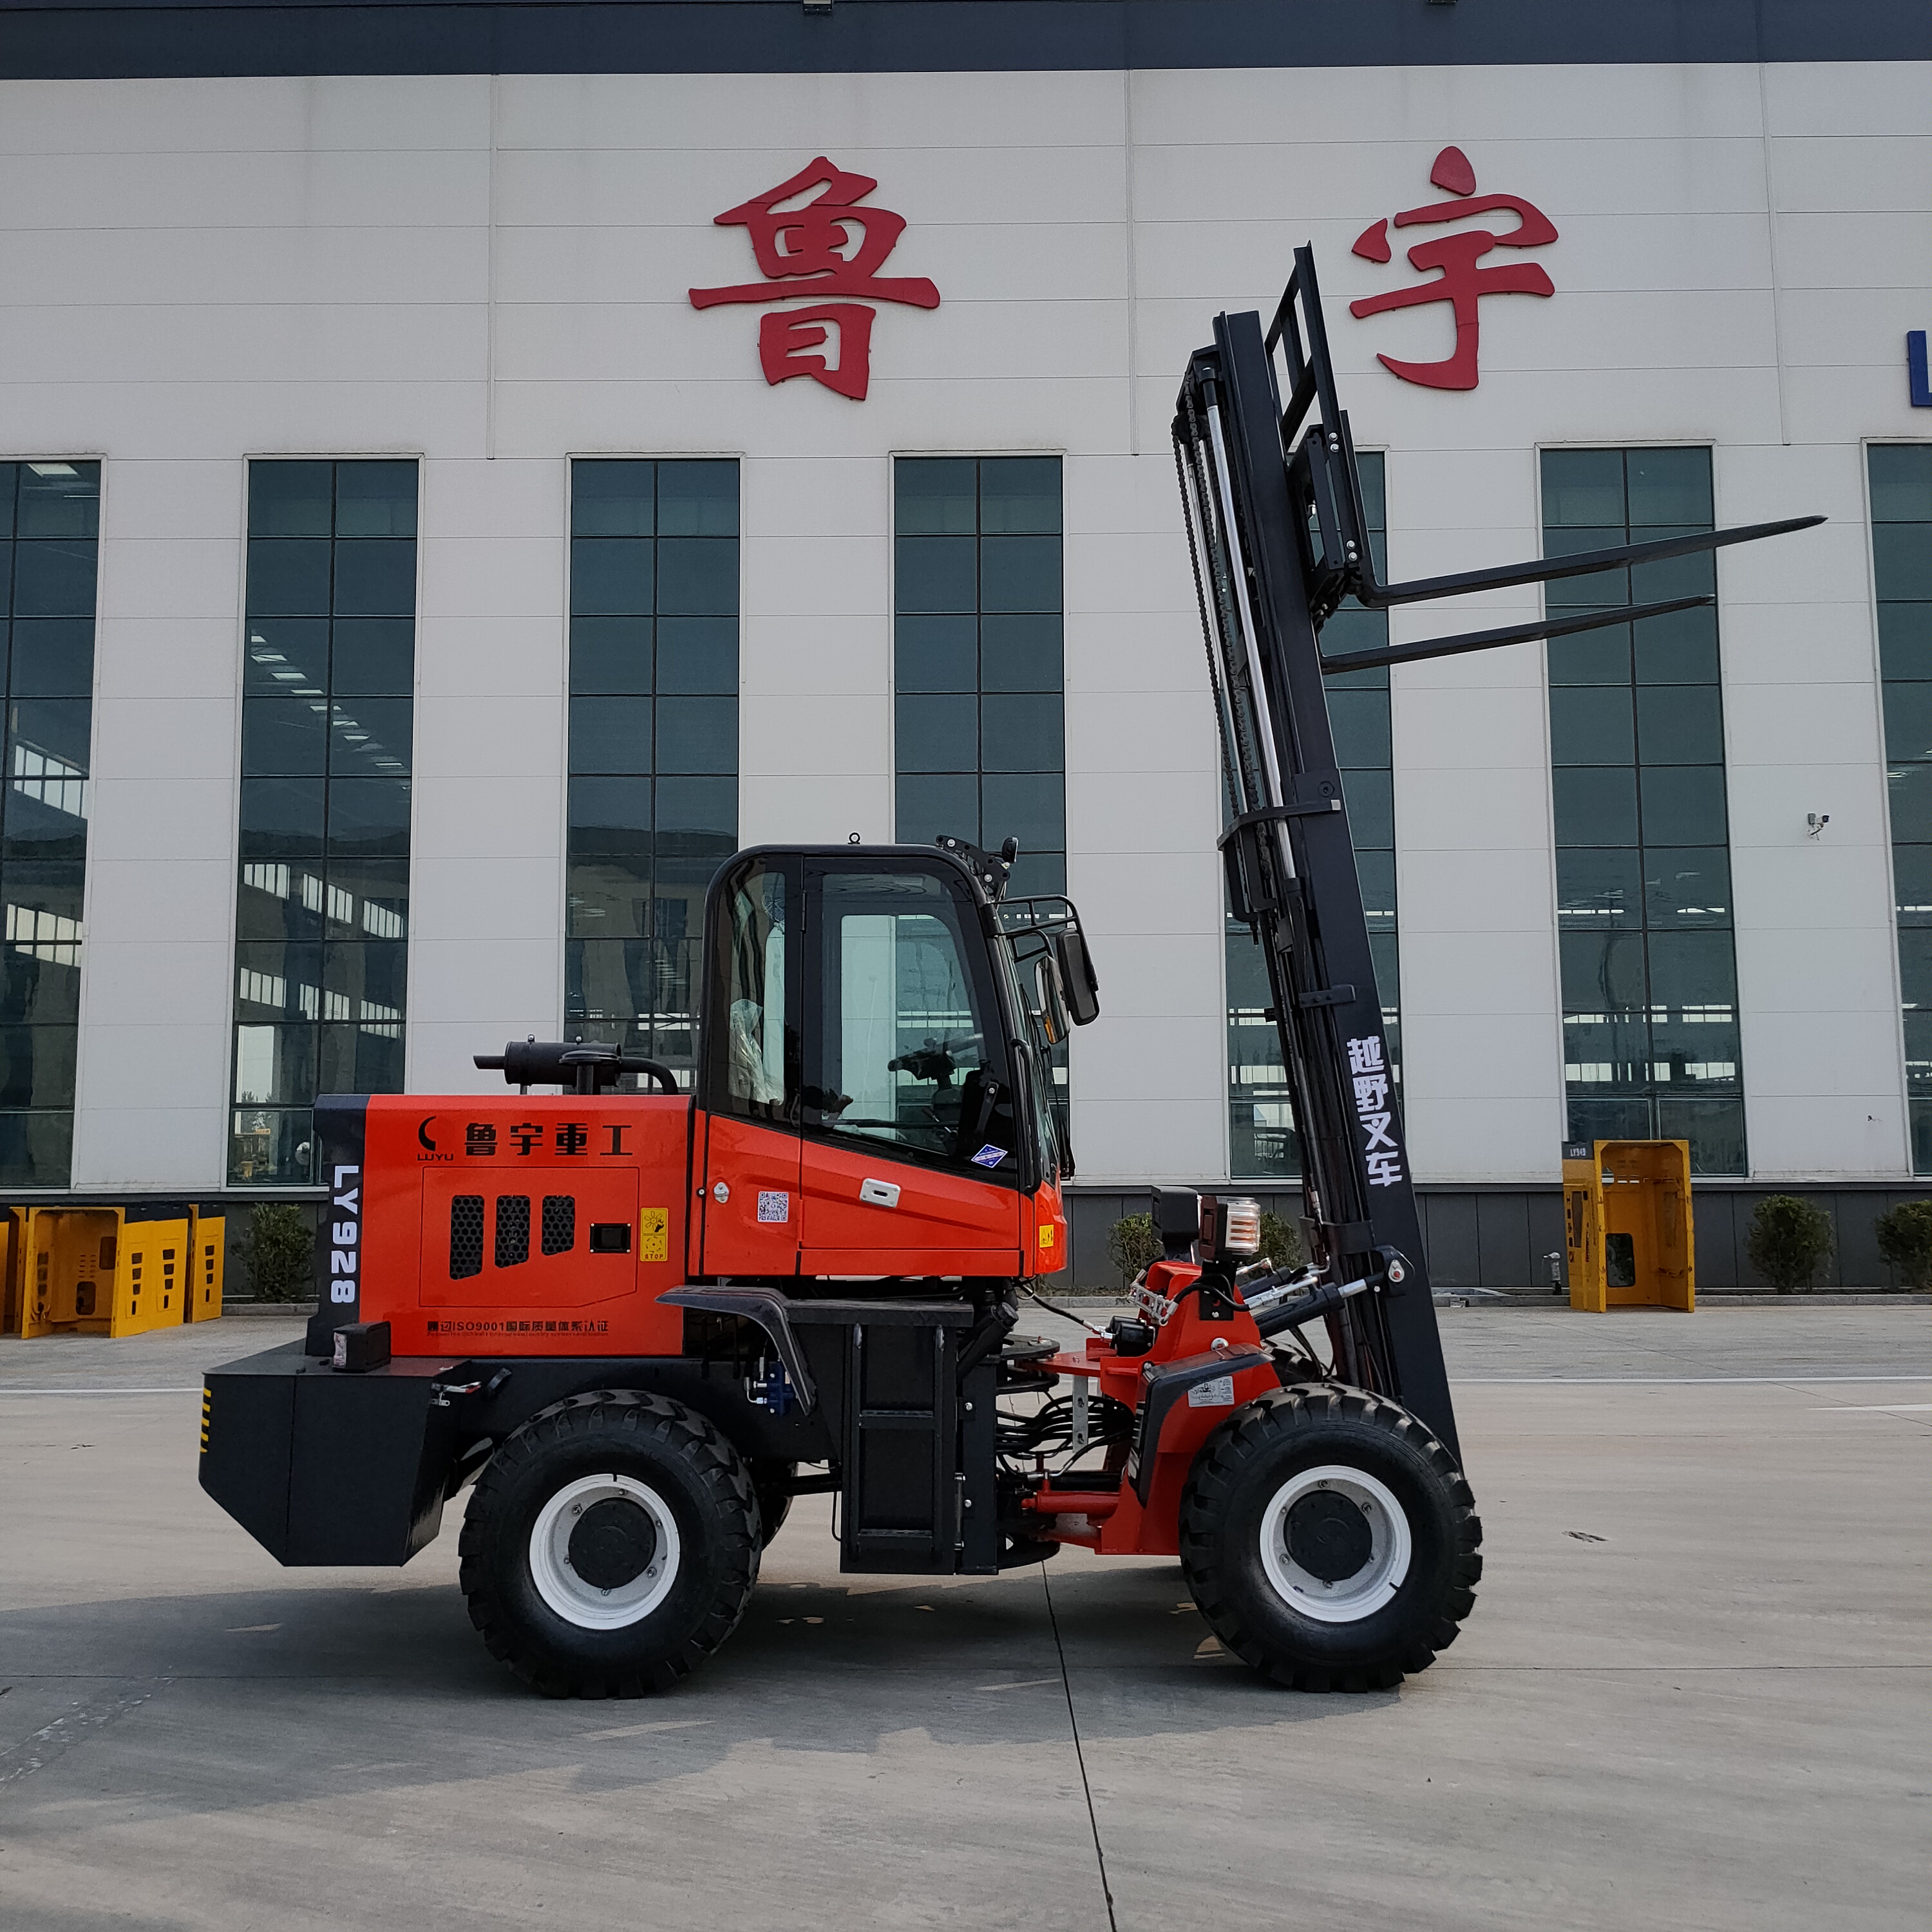 The advantages of off-road forklifts